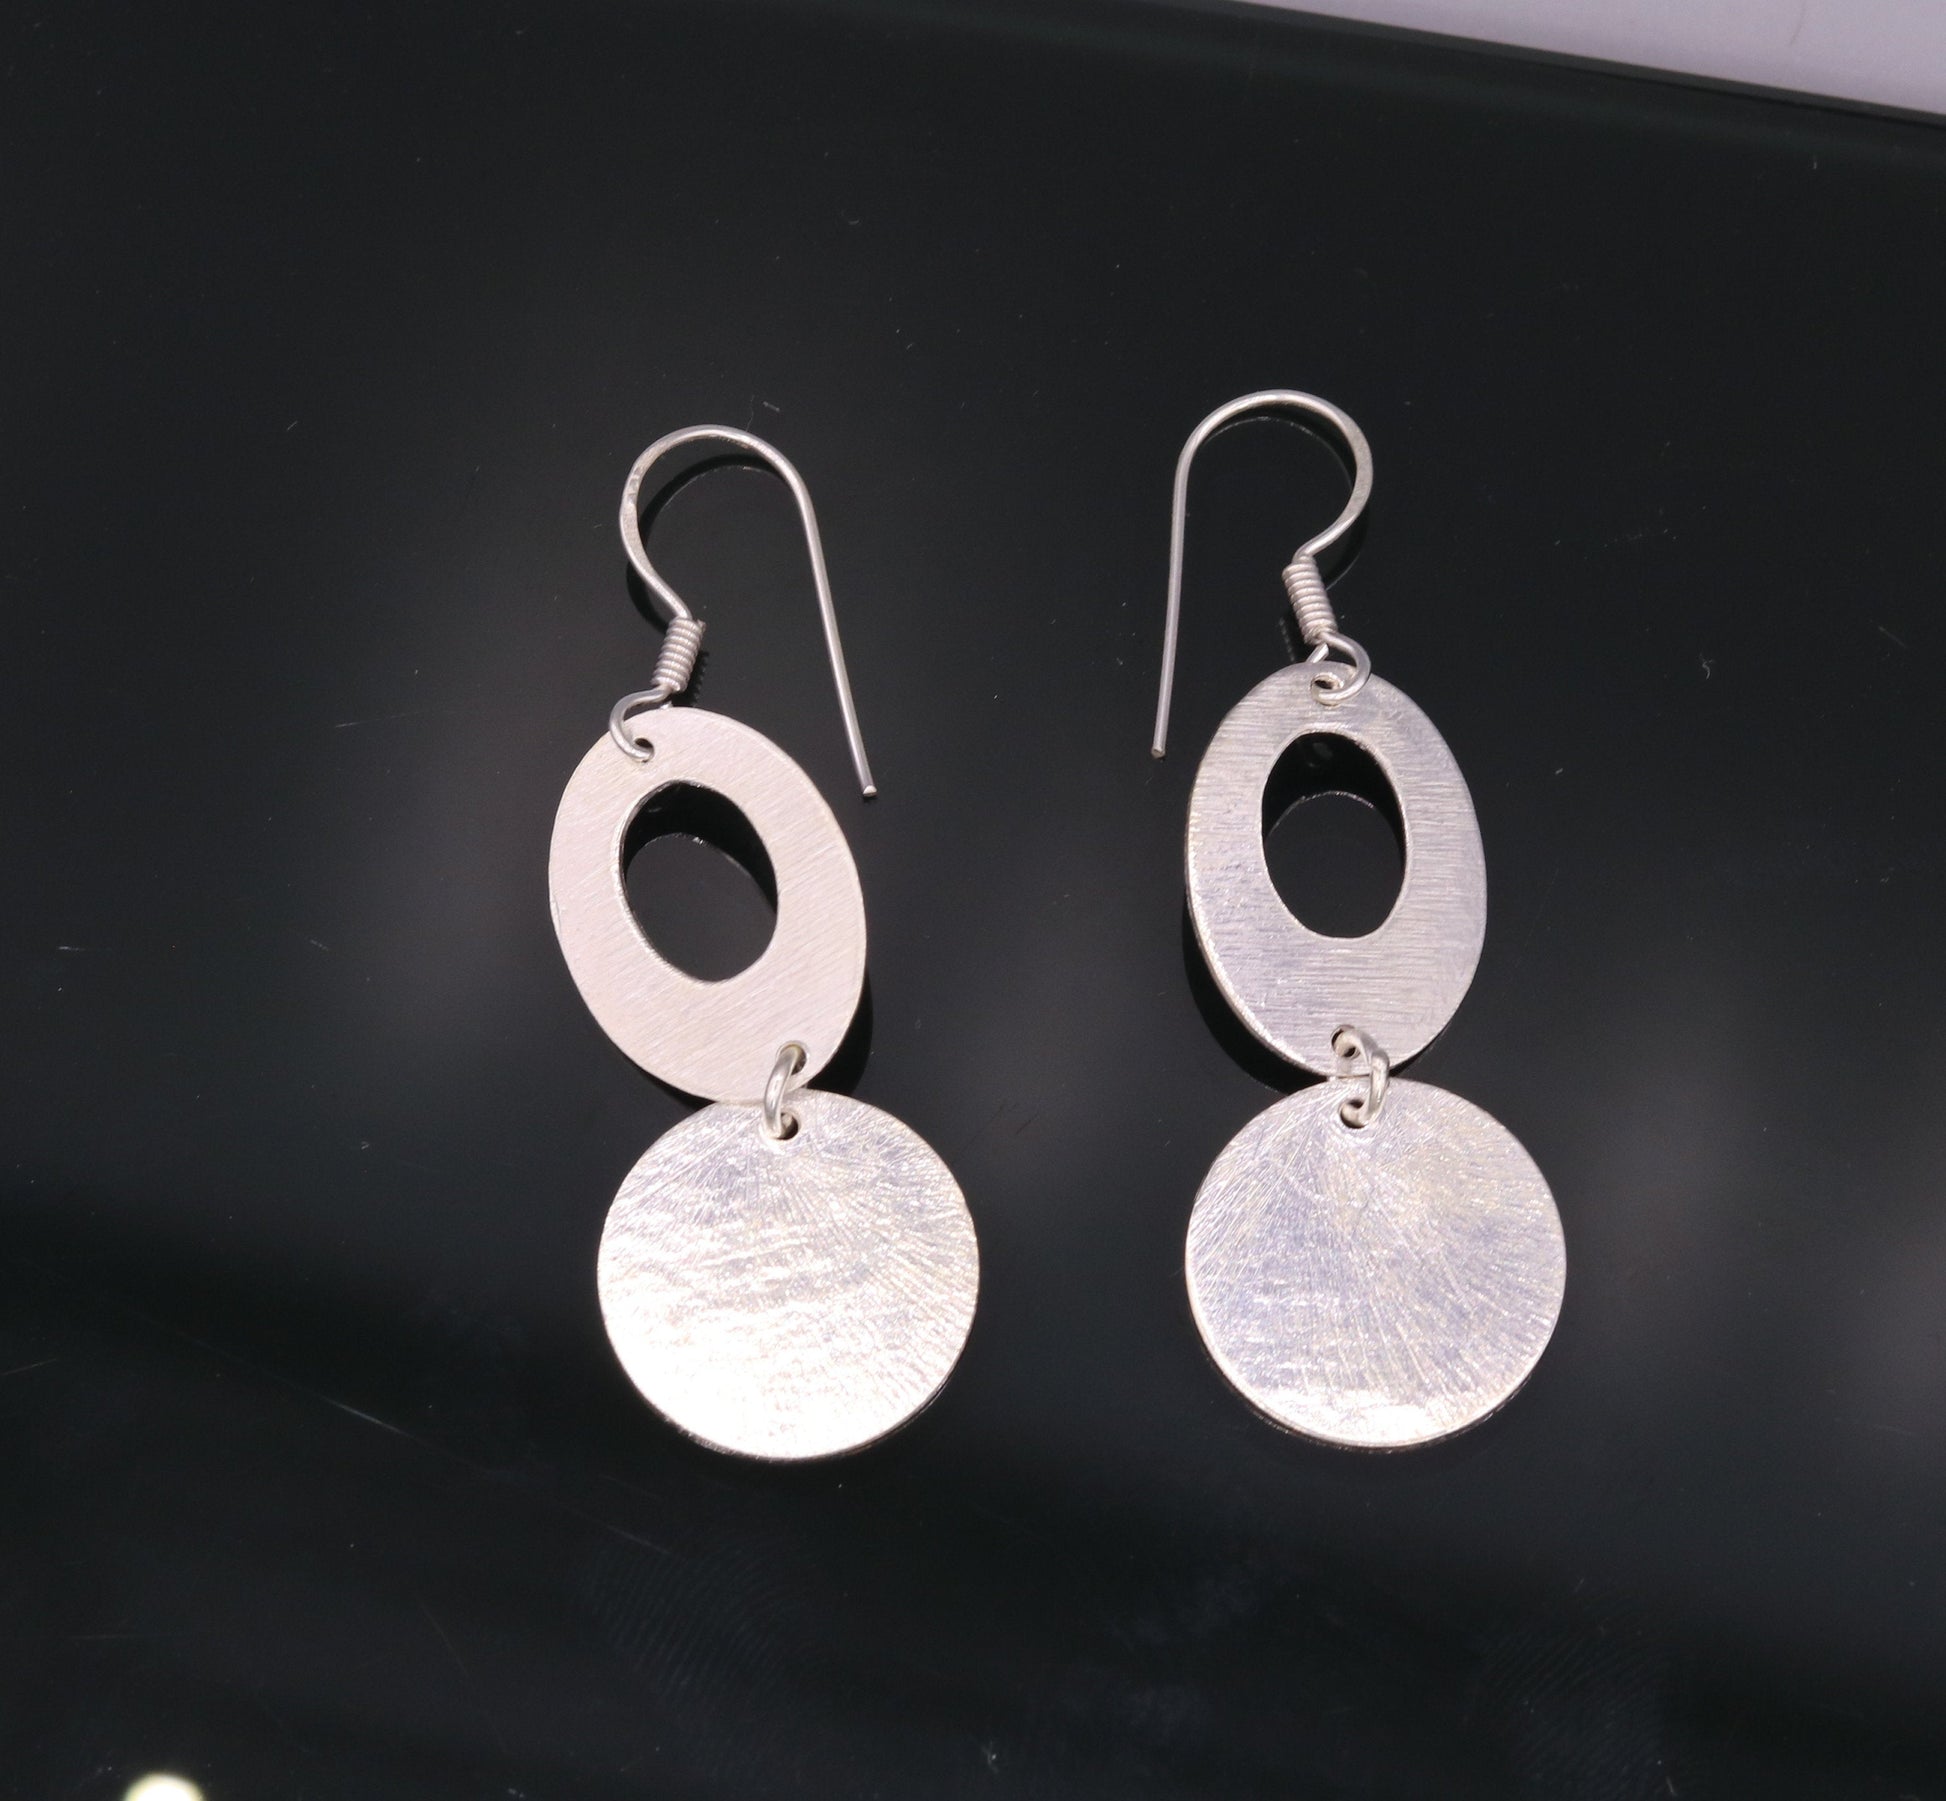 Handmade  925 solid sterling silver scratch link fancy hoops earrings tribal jewelry from Rajasthan india daily use jewelry s418 - TRIBAL ORNAMENTS